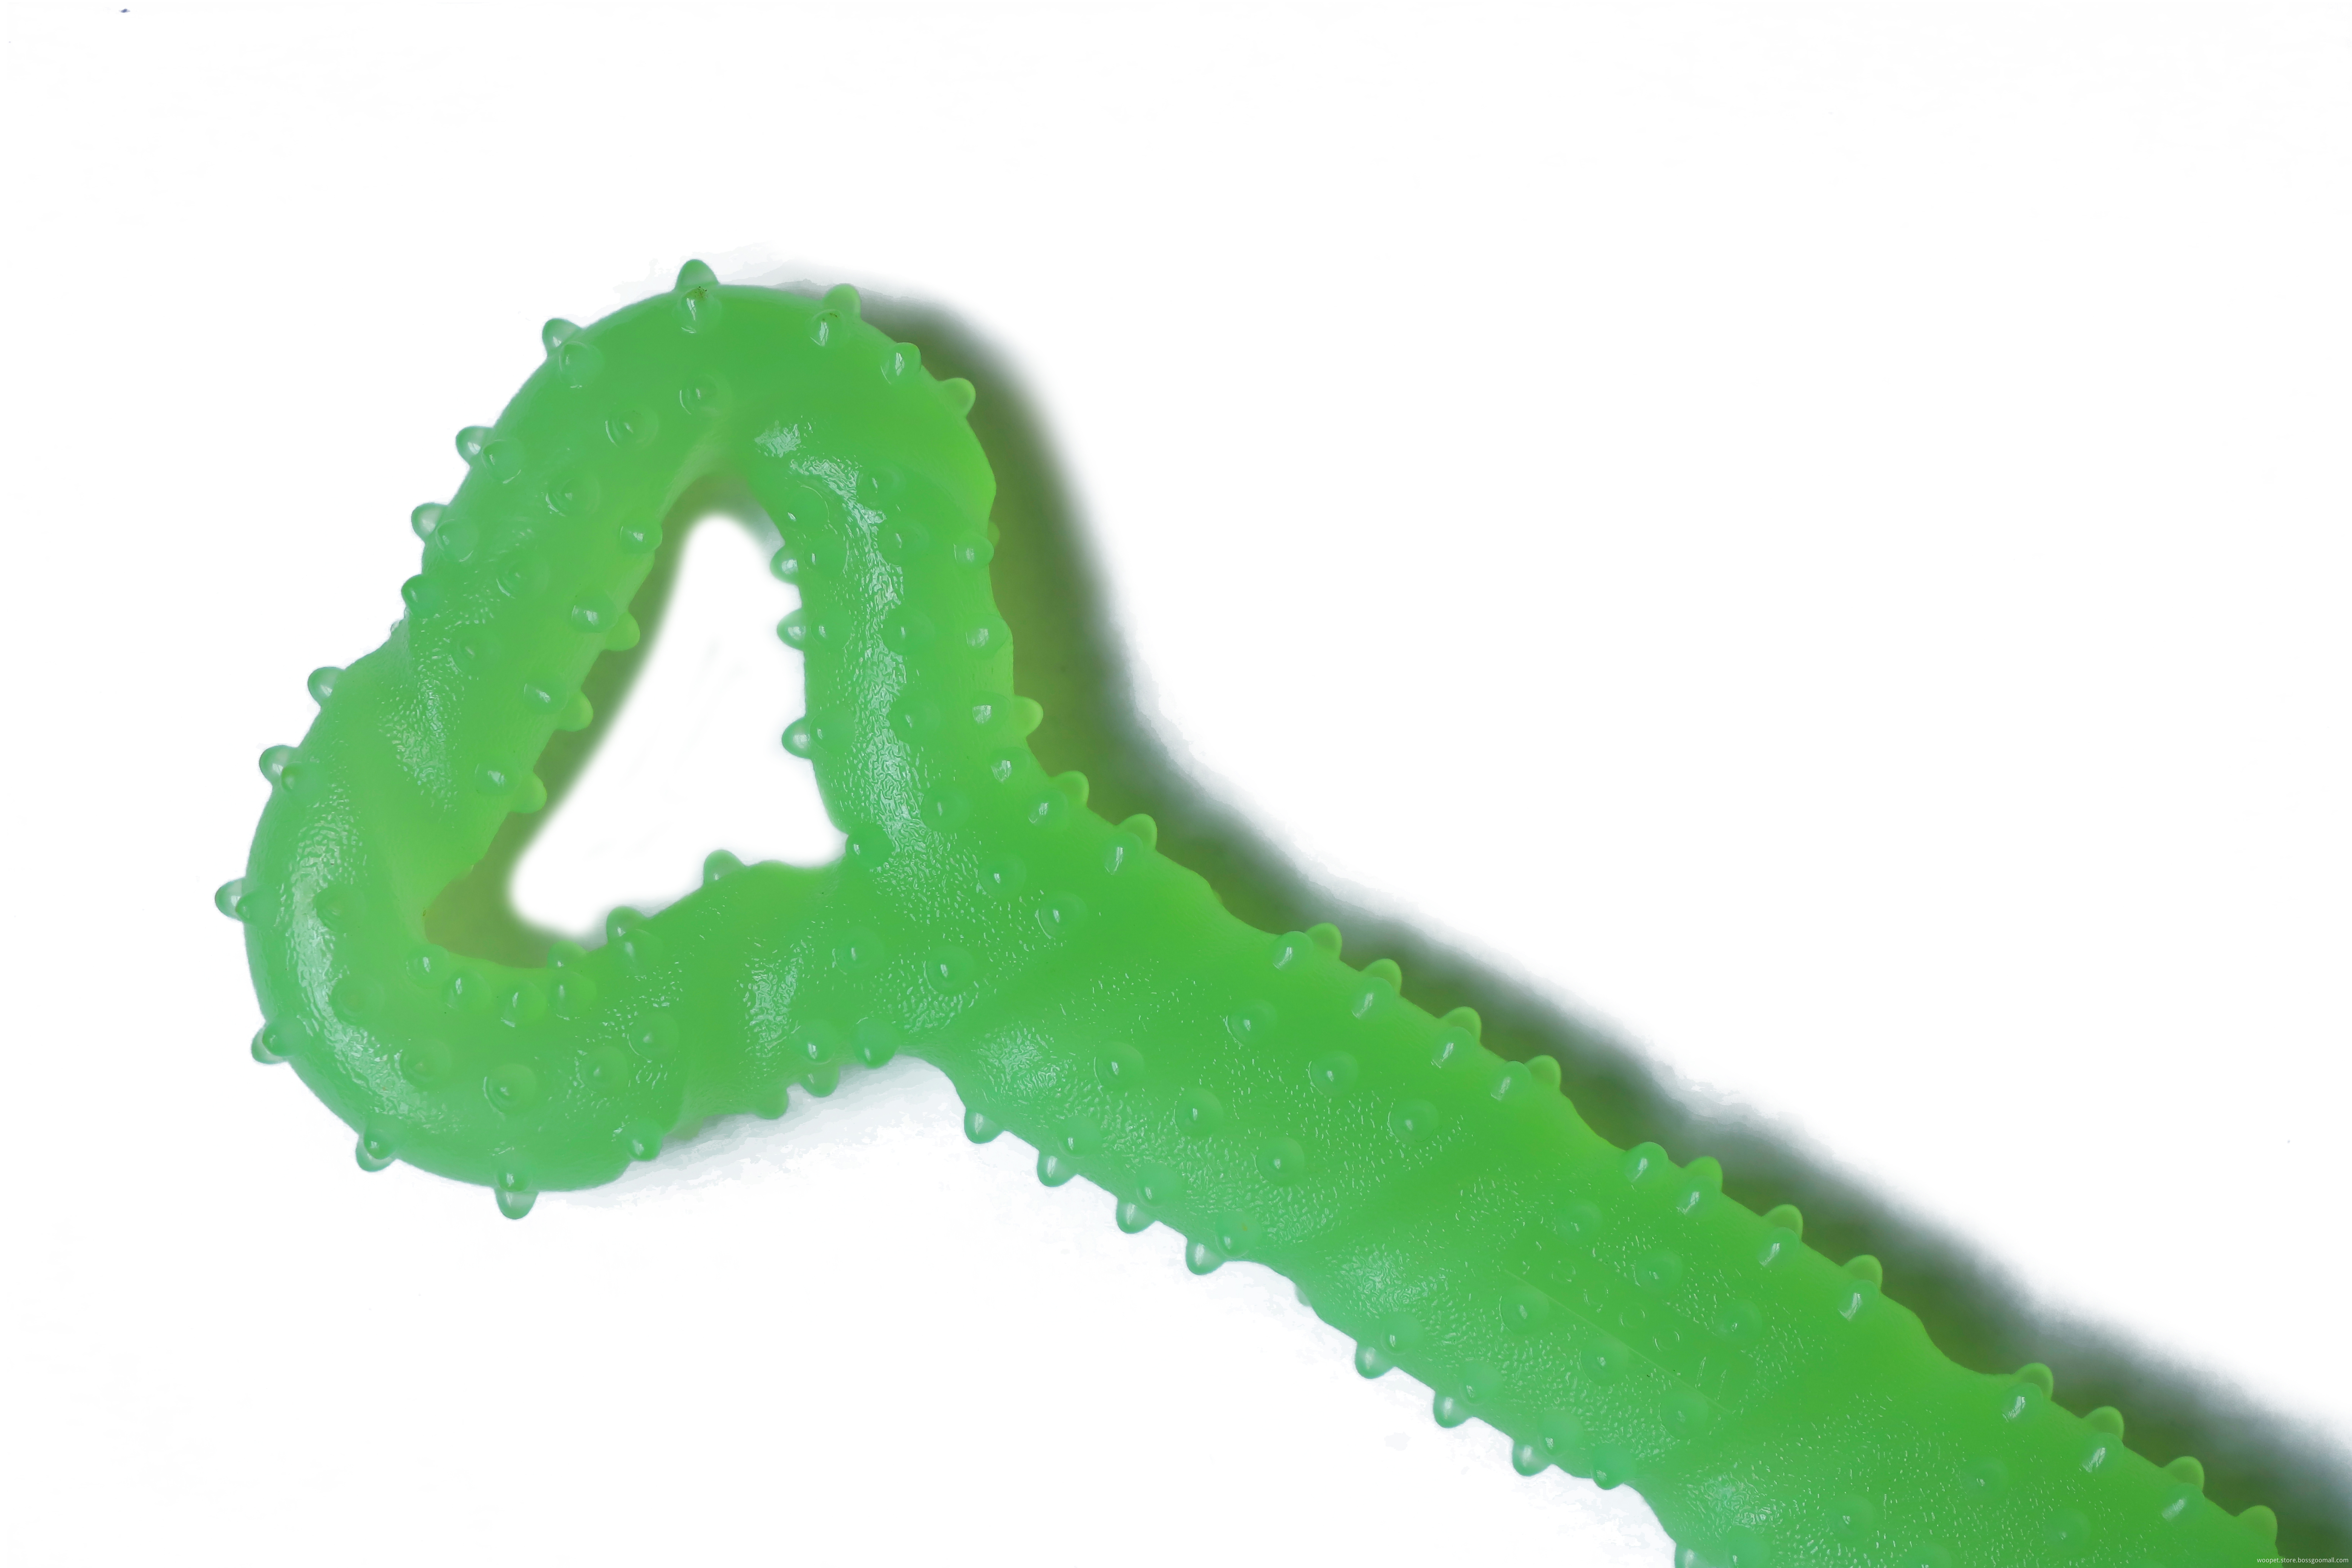 Glow In The Dark Heavy Duty Durable Interactive Chew Toys for Aggressive Chewers